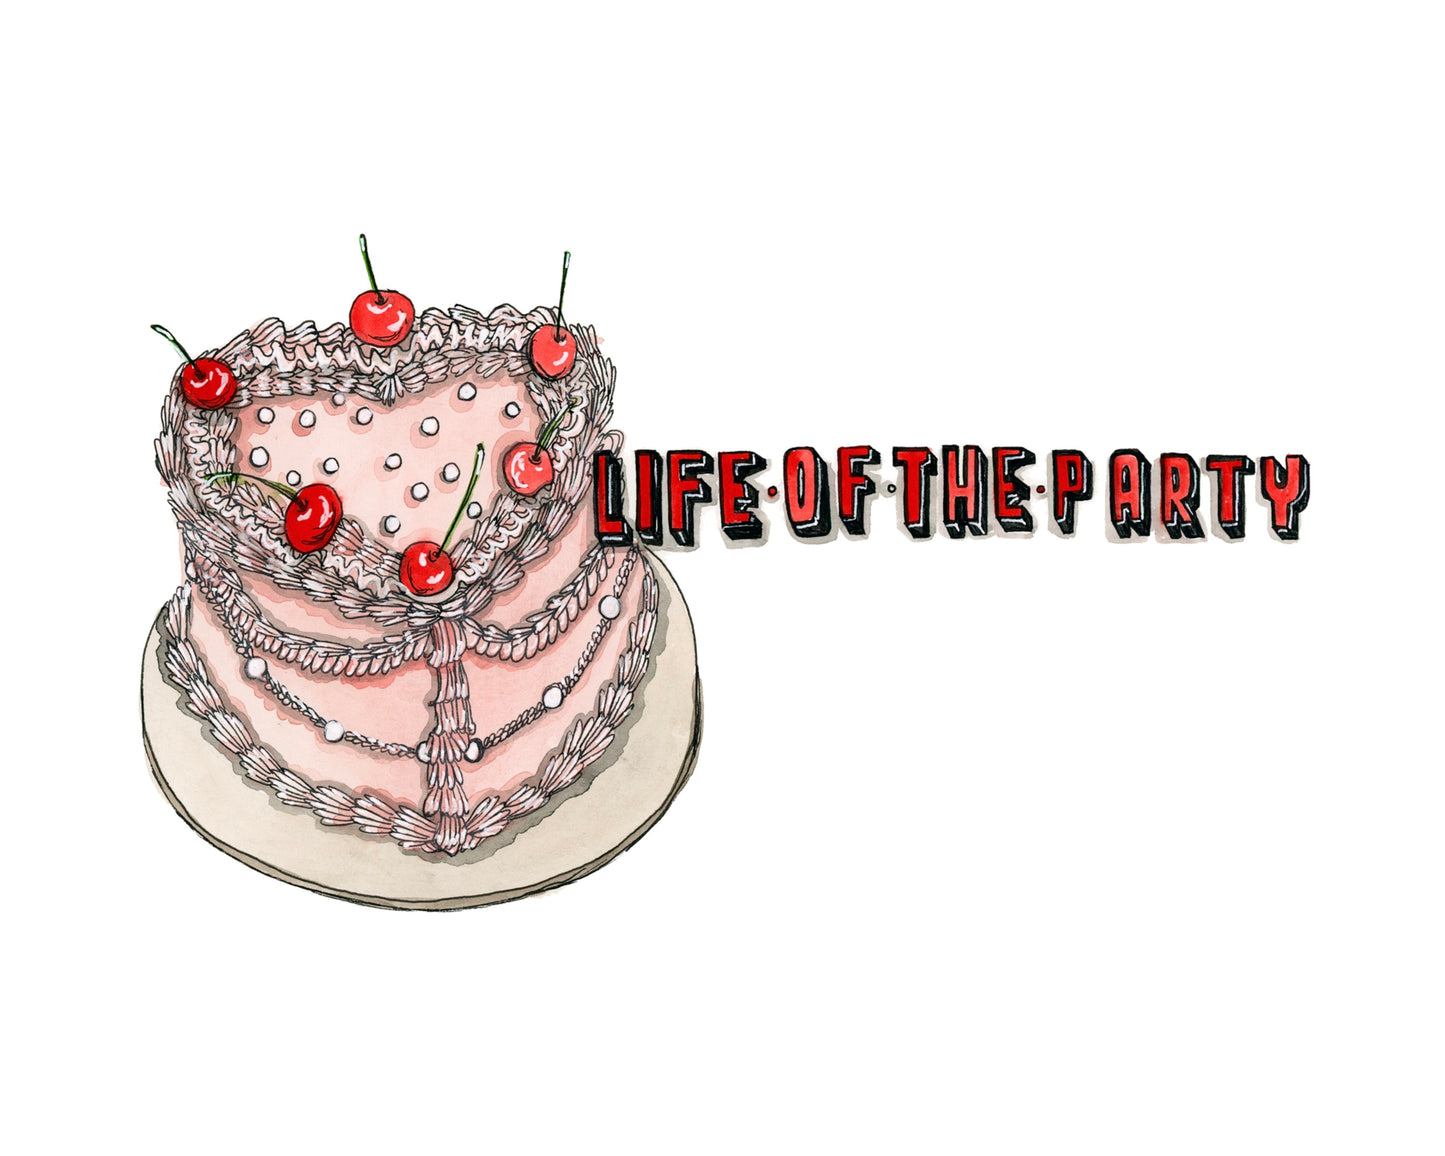 Life of the Party Vintage Cake Print